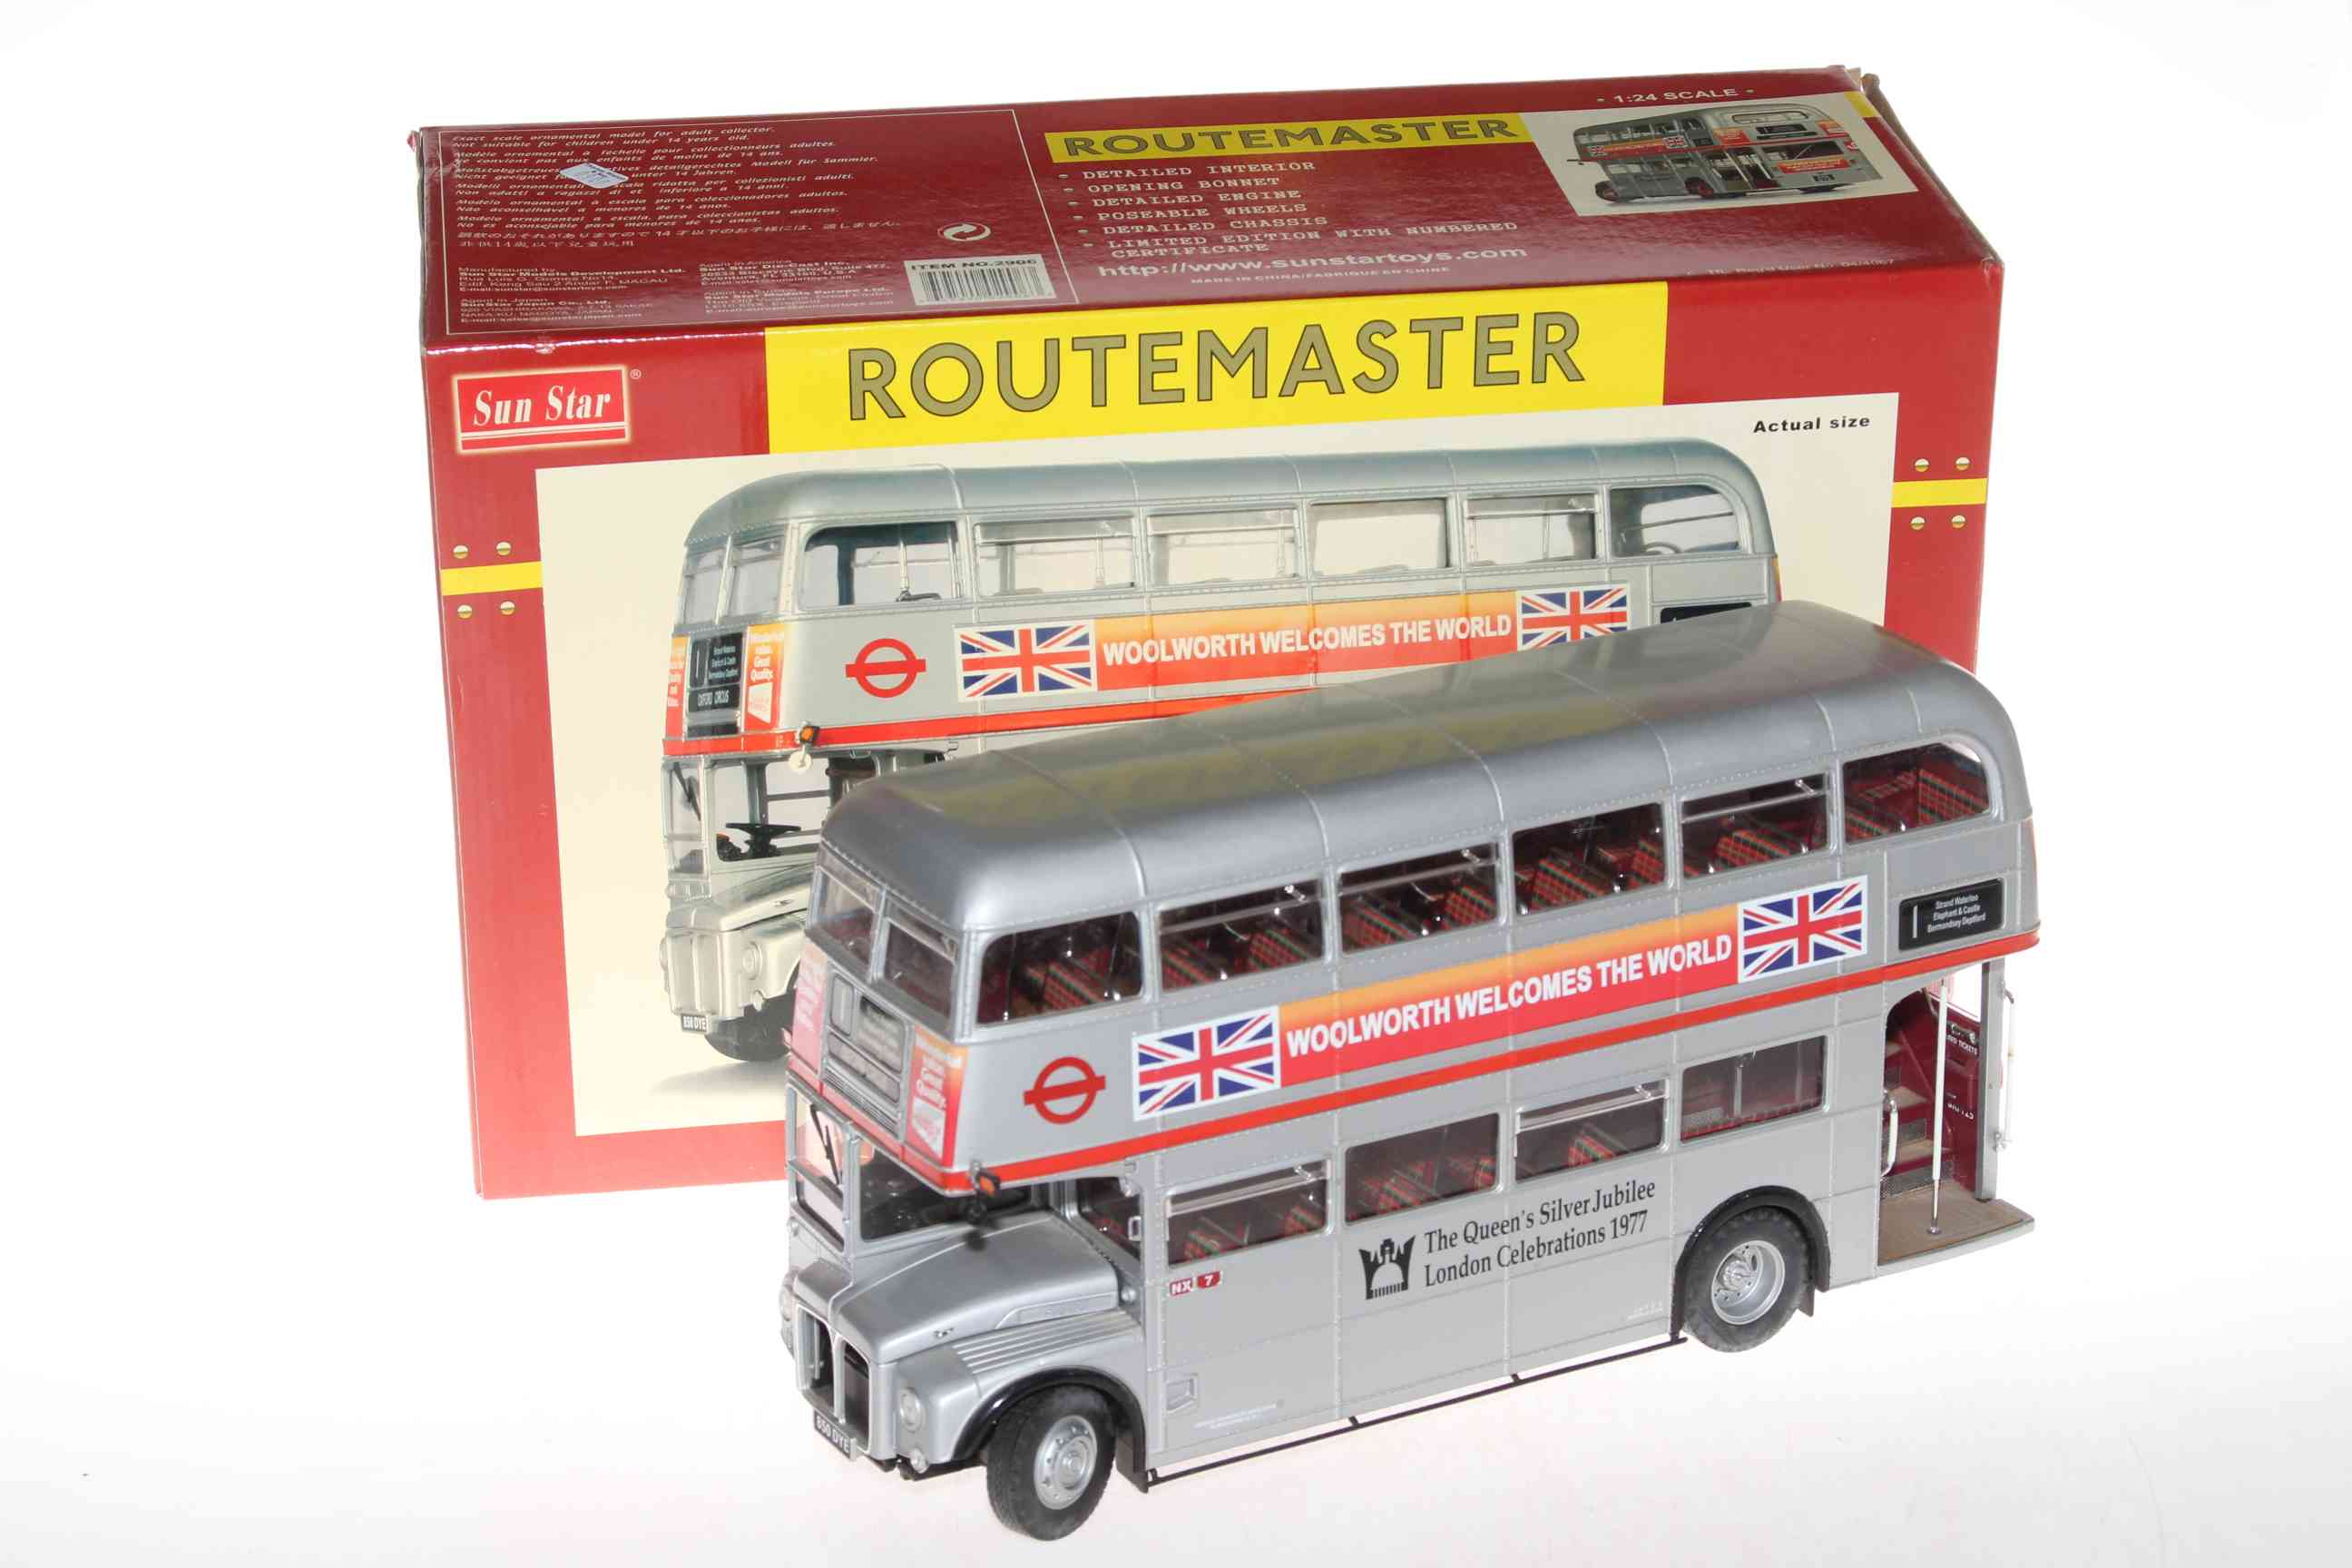 Sun Star 'Routemaster' Queens Jubilee London 1977 Woolworth Bus, boxed.